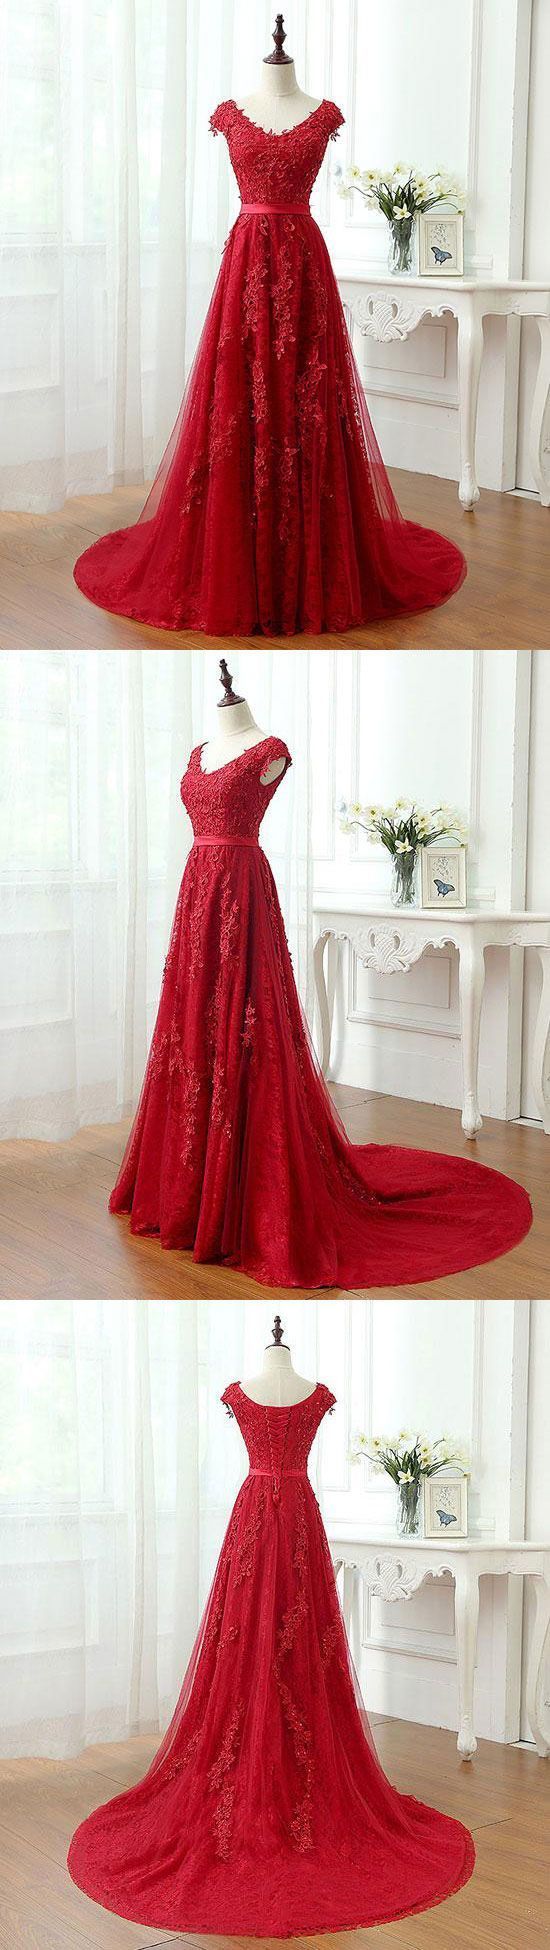 Sexy Red Prom Dress, Tulle Appliques Prom Dresses, Formal Long Evening Dress,pd14770